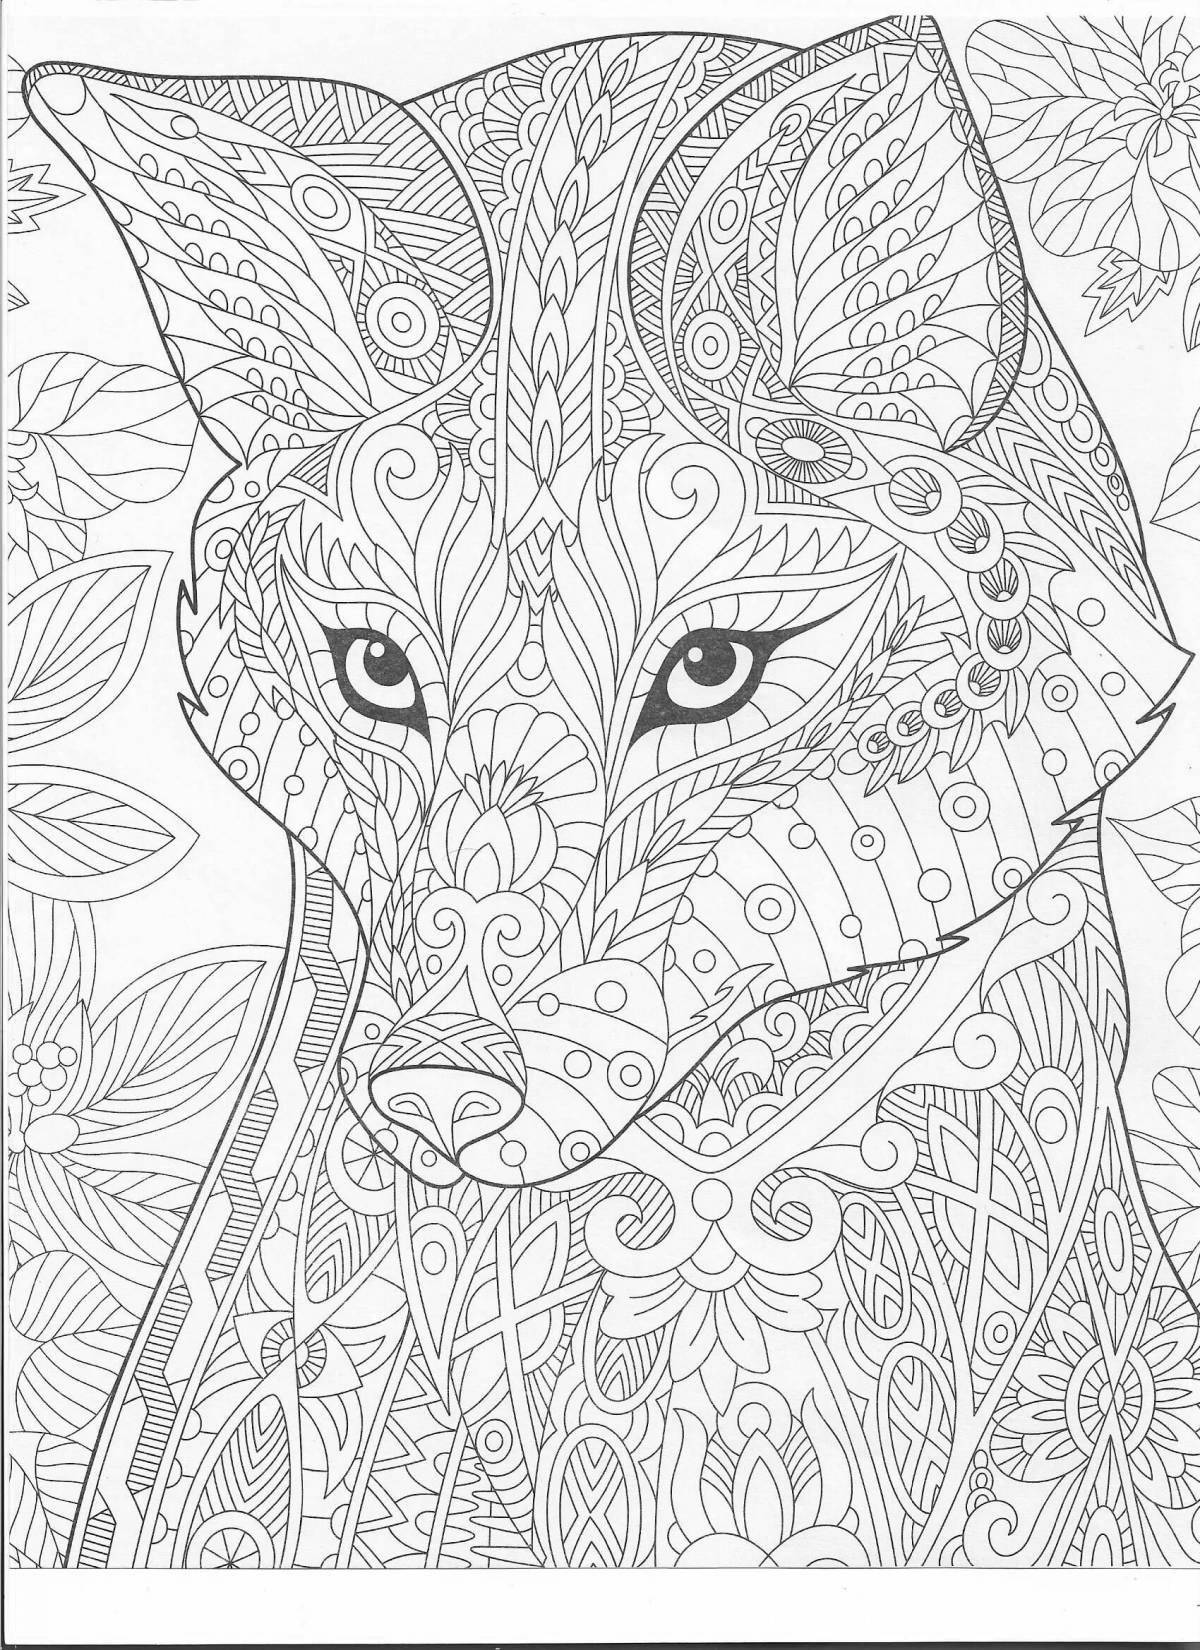 Elegant coloring for girls 10 years old - very beautiful animals